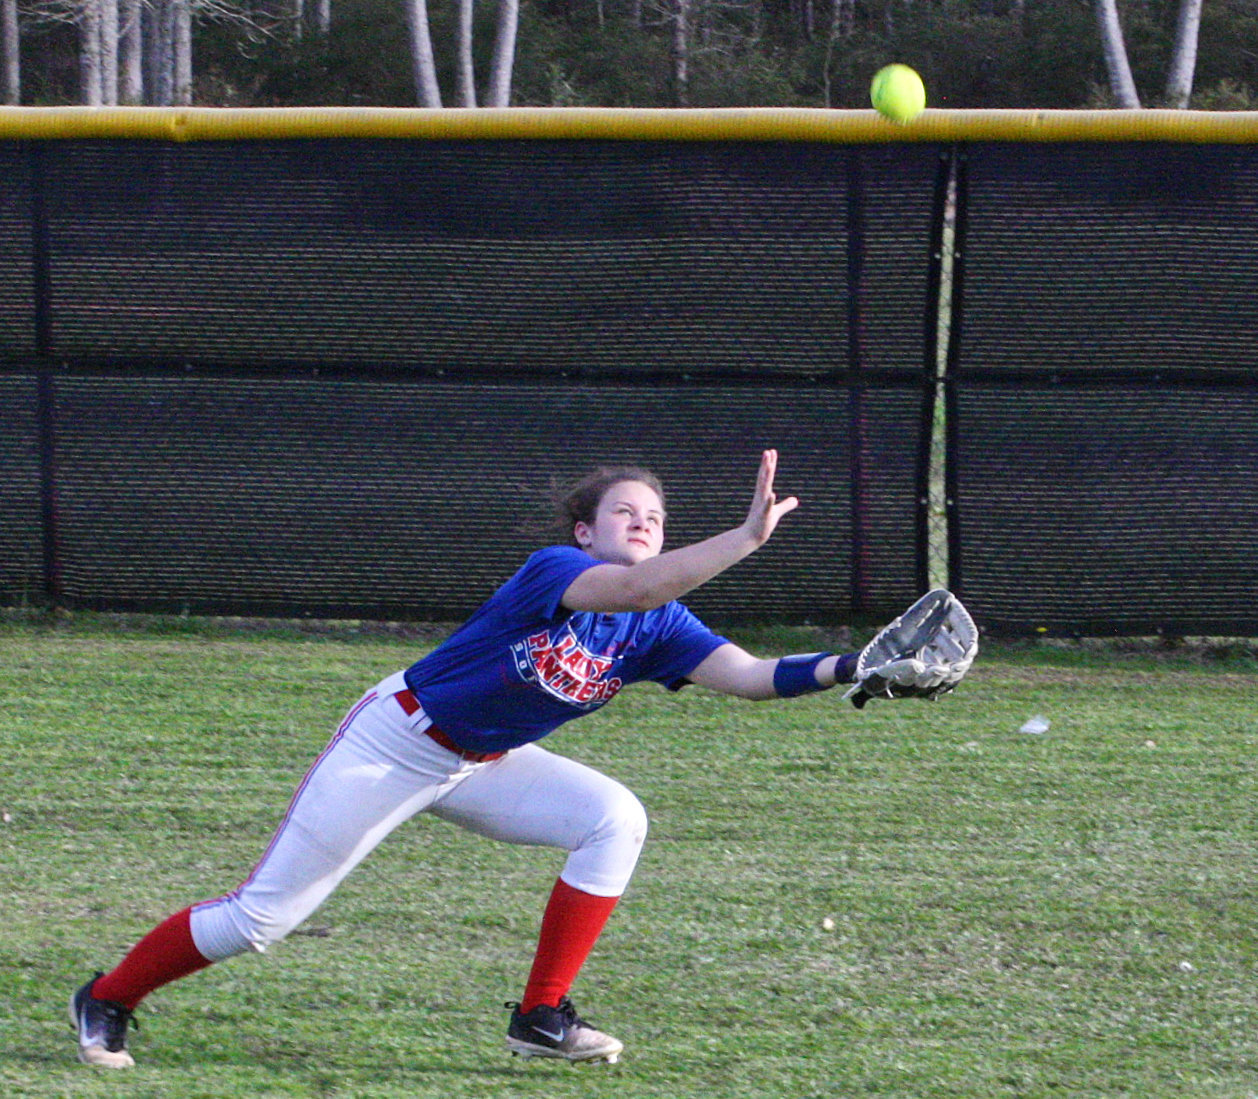 Lady Panther Rightfielder Laynie Culp closes for a difficult play down the line.